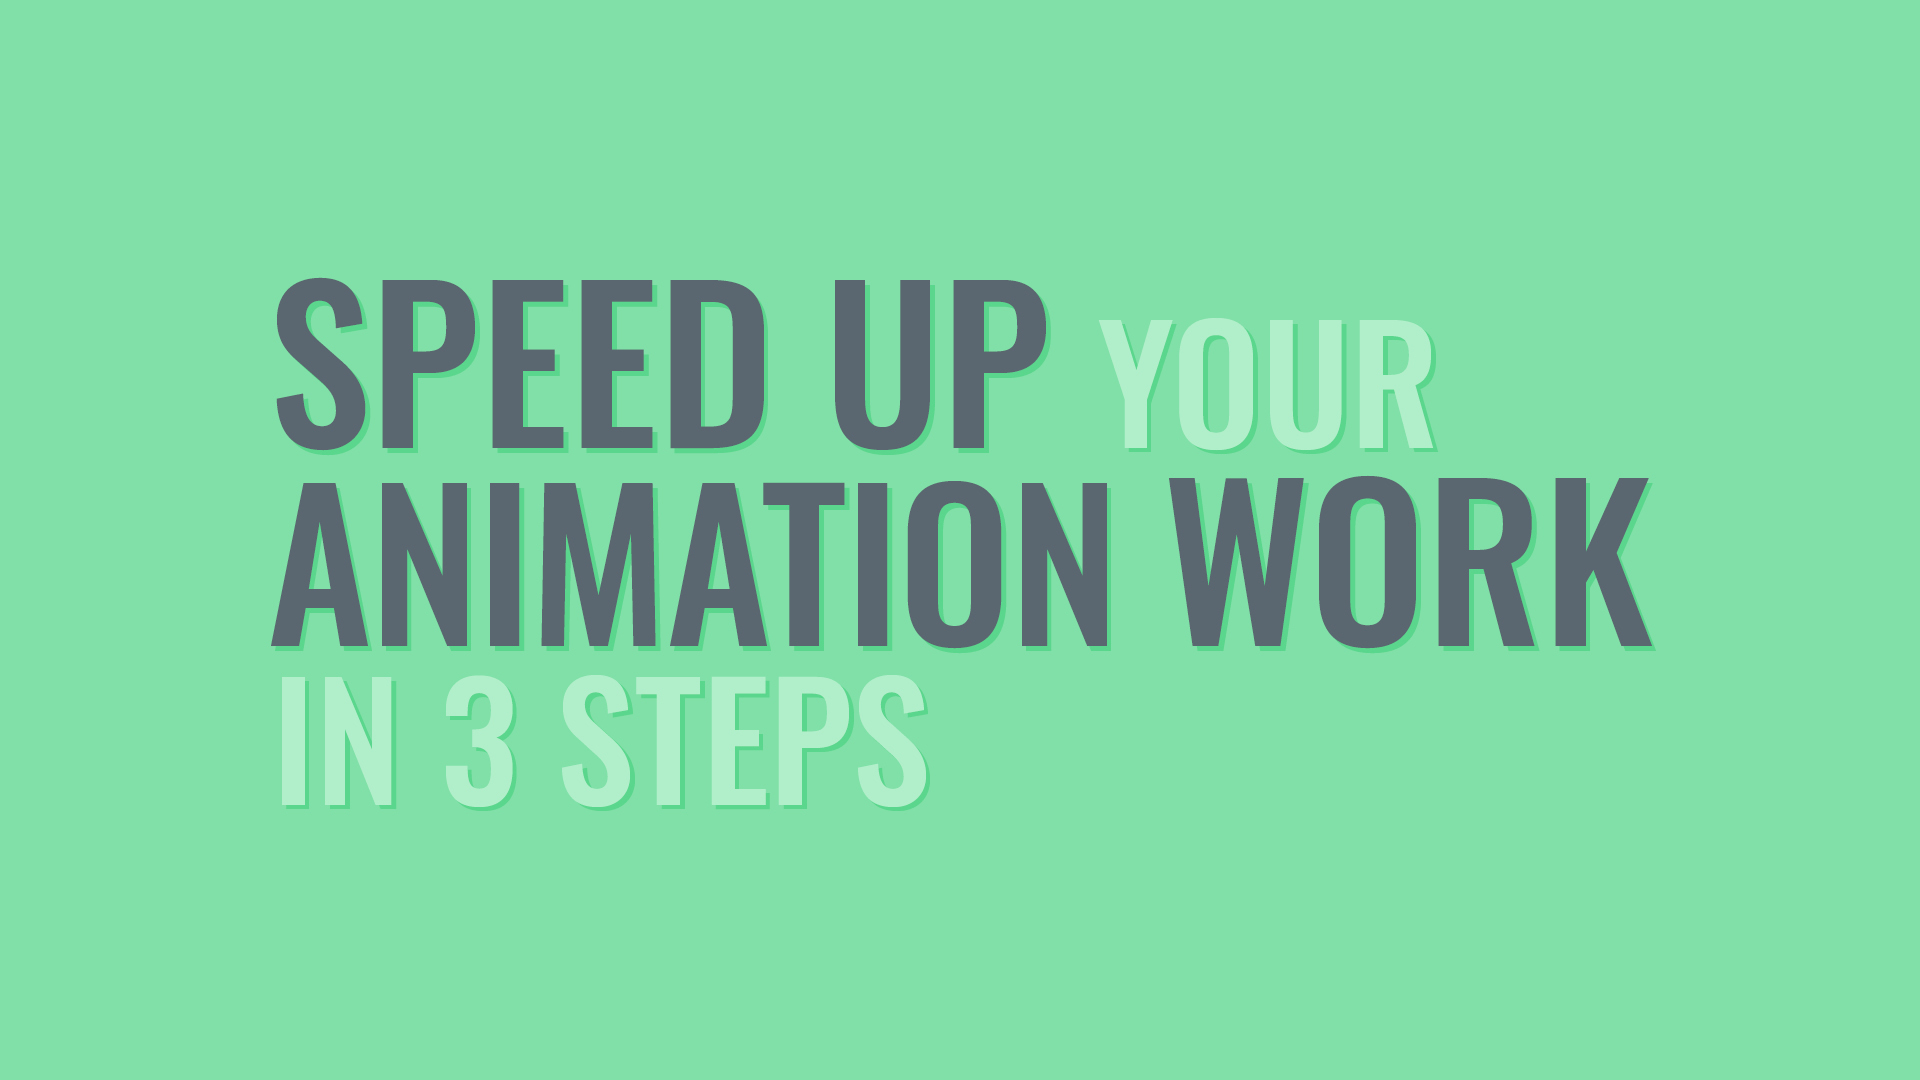 Speed Up Your Animation Work in 3 Steps